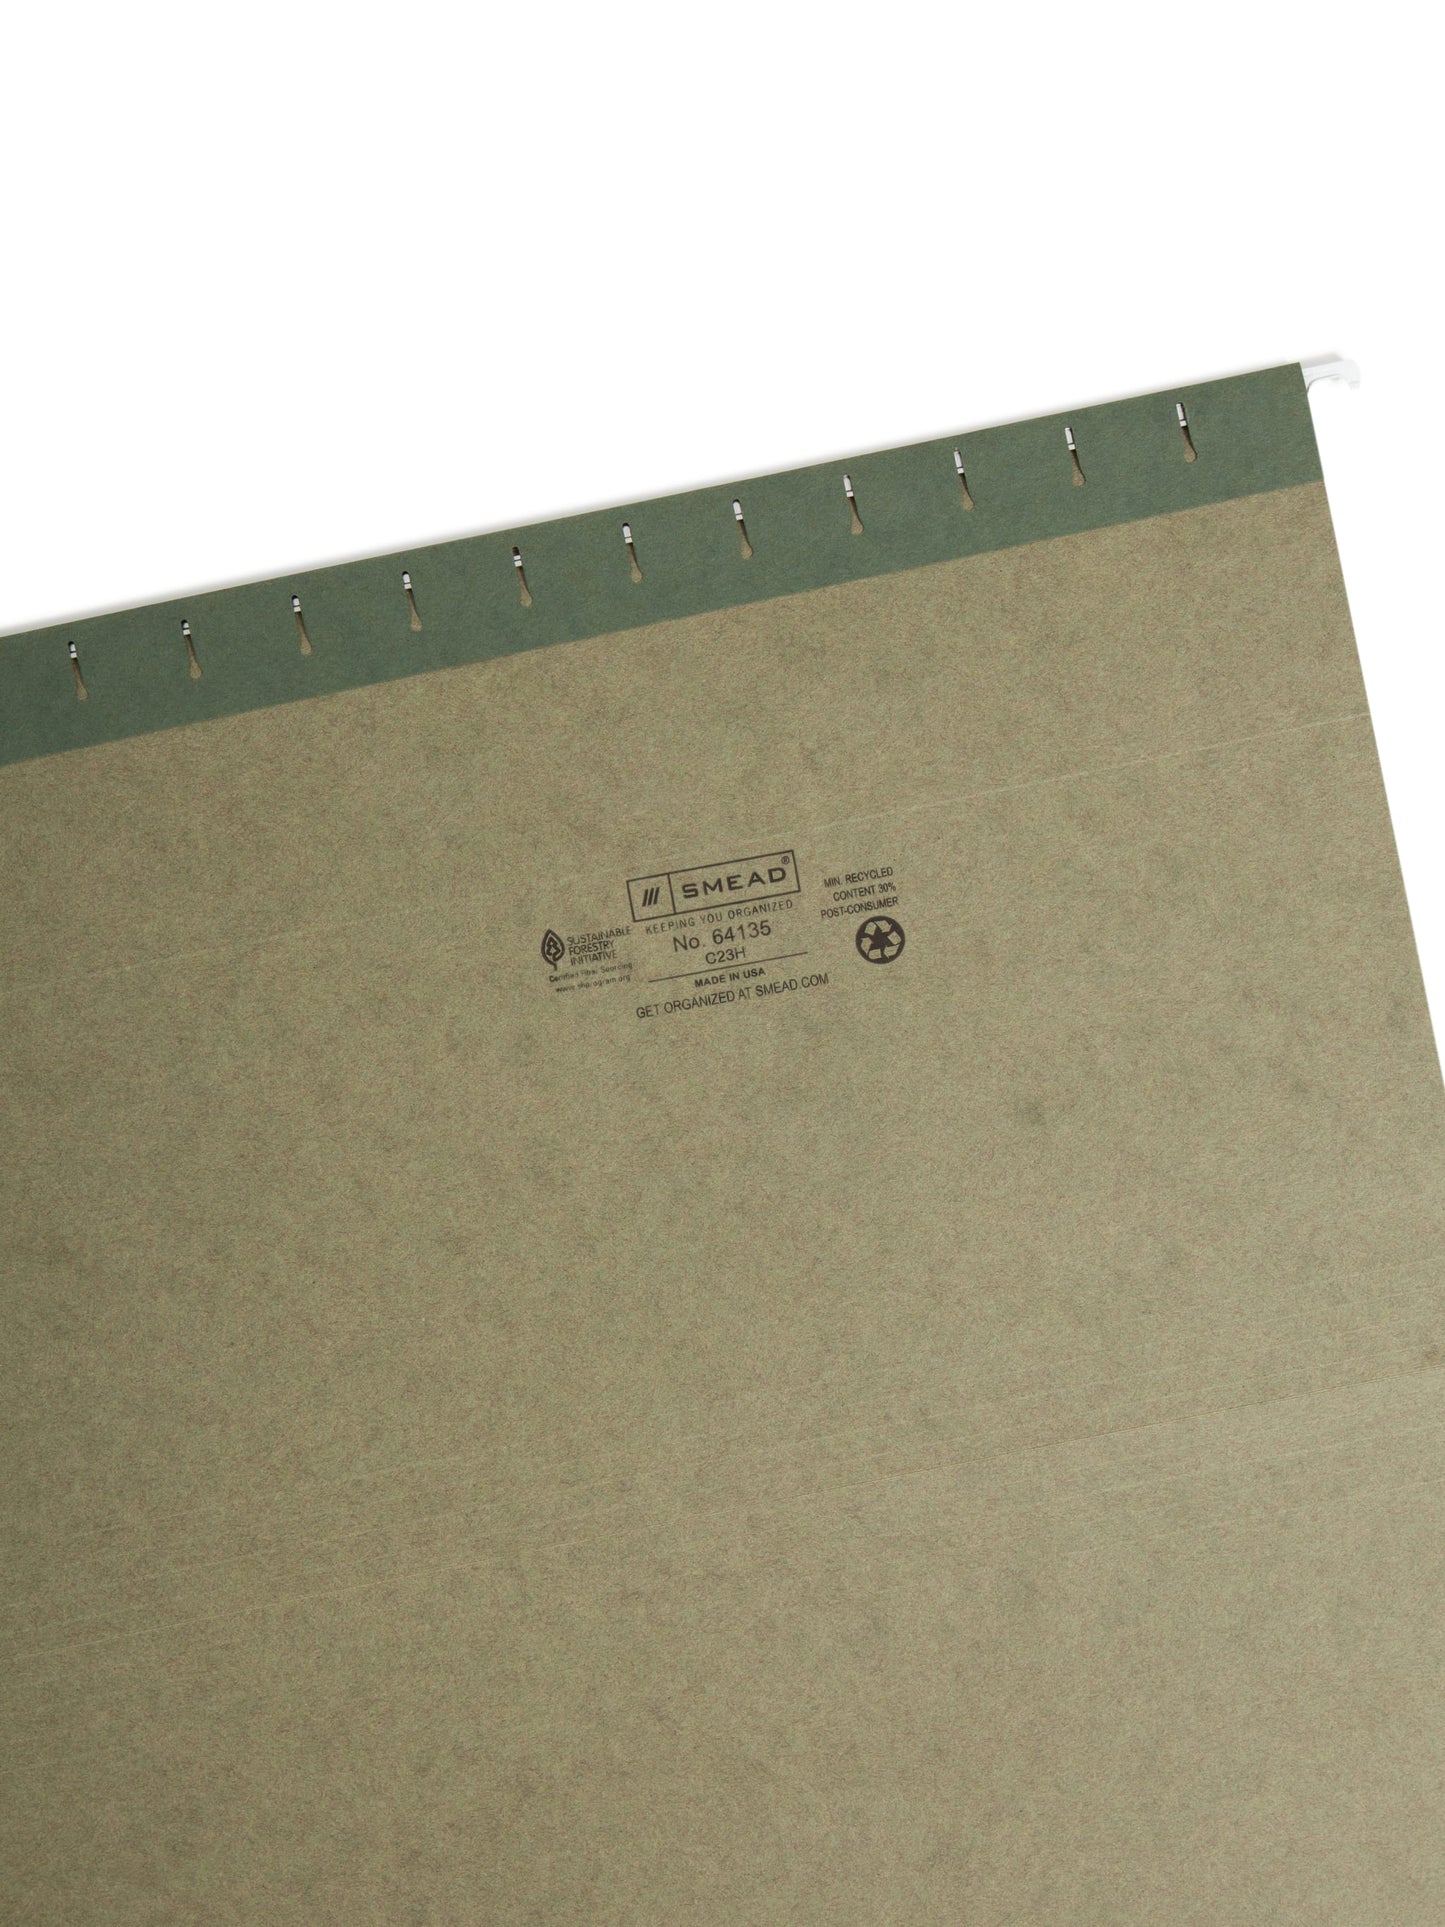 Standard Hanging File Folders with 1/3-Cut Tabs, Standard Green Color, Legal Size, Set of 25, 086486641357